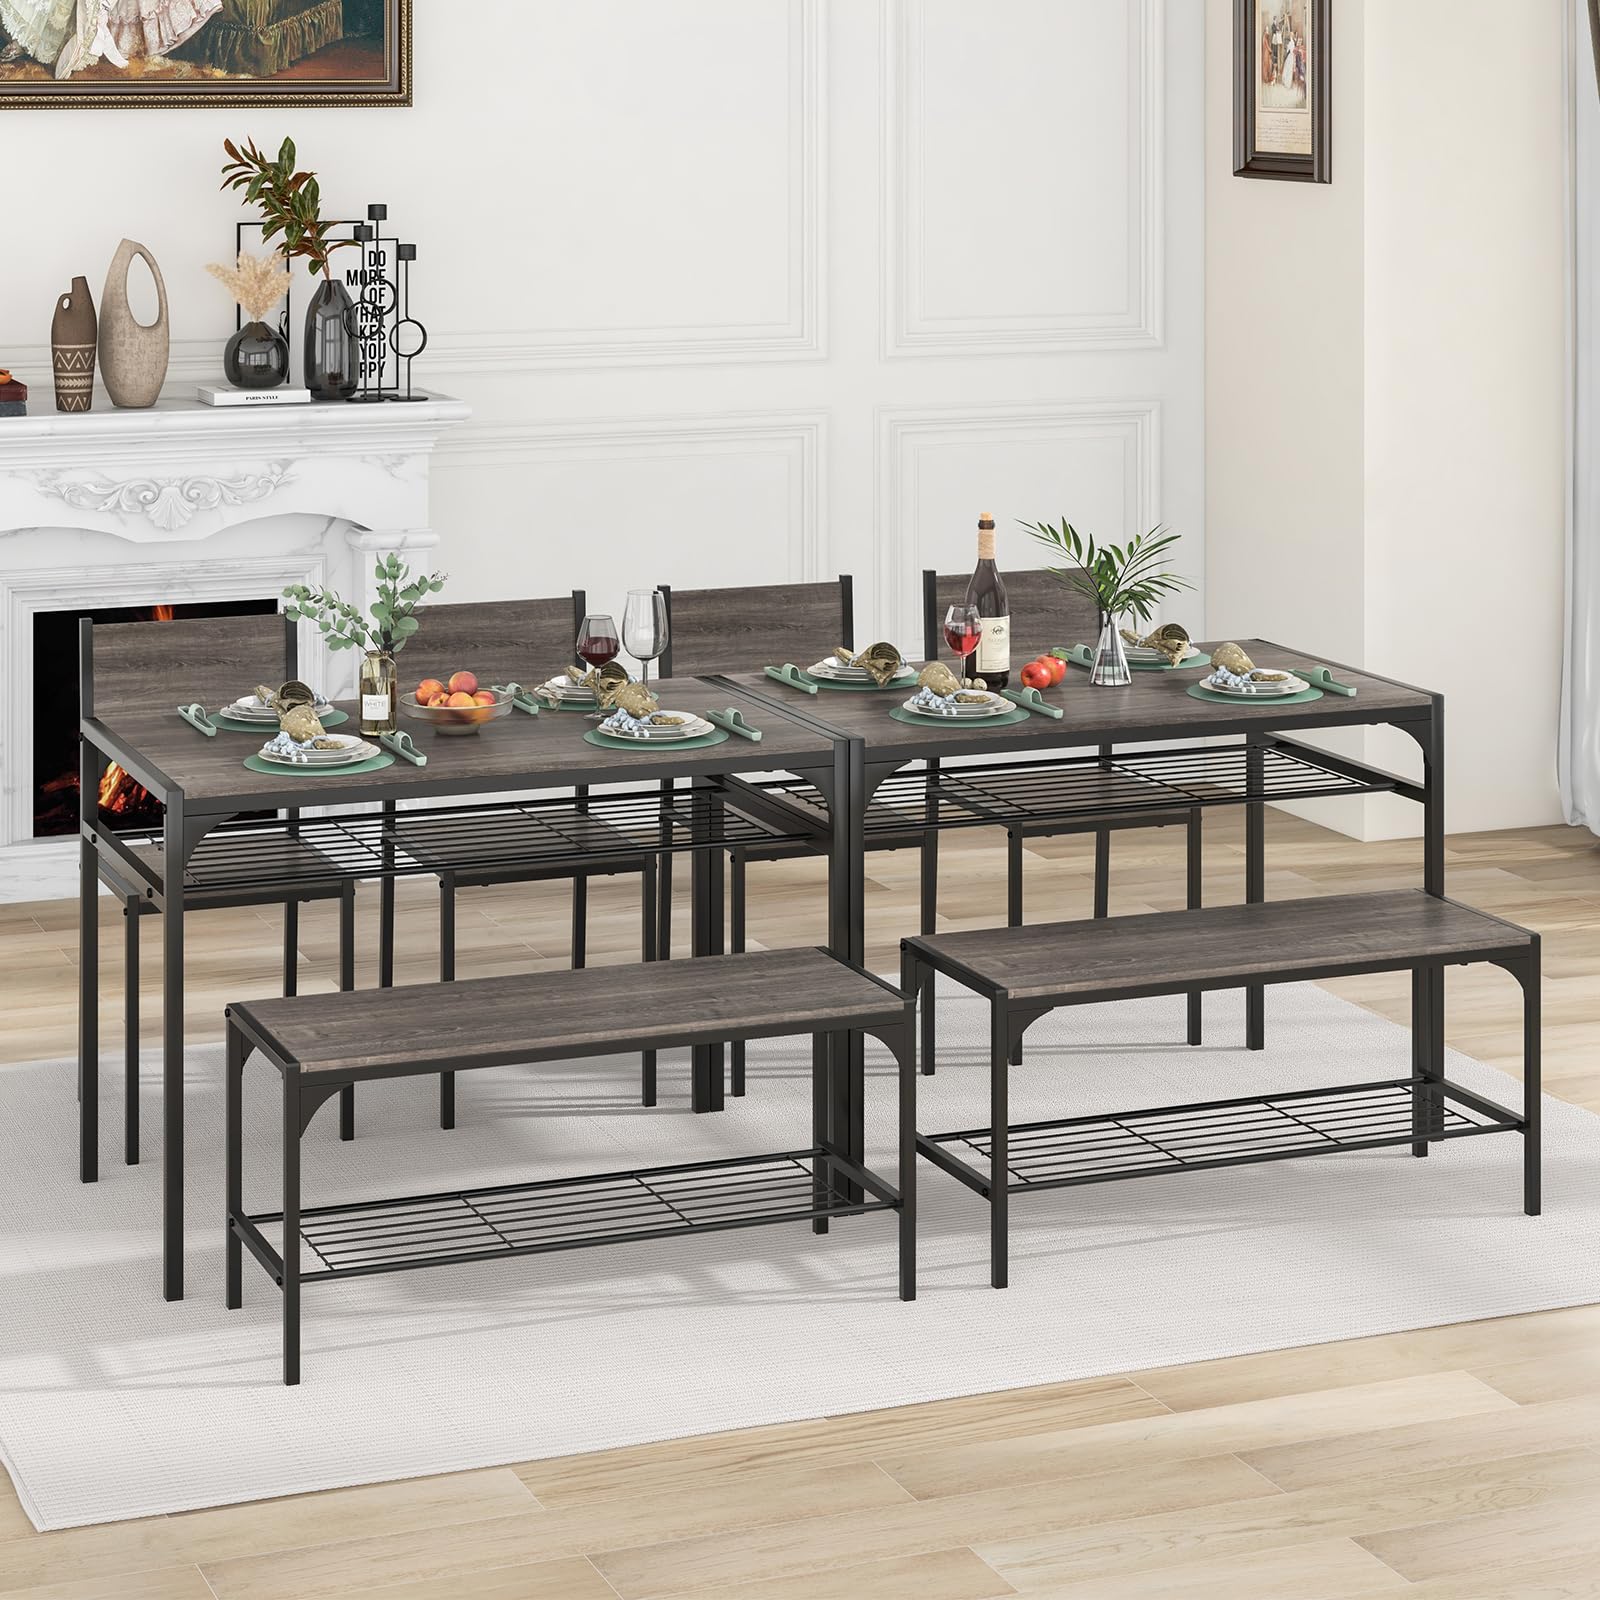 Giantex Dining Table Set for 4